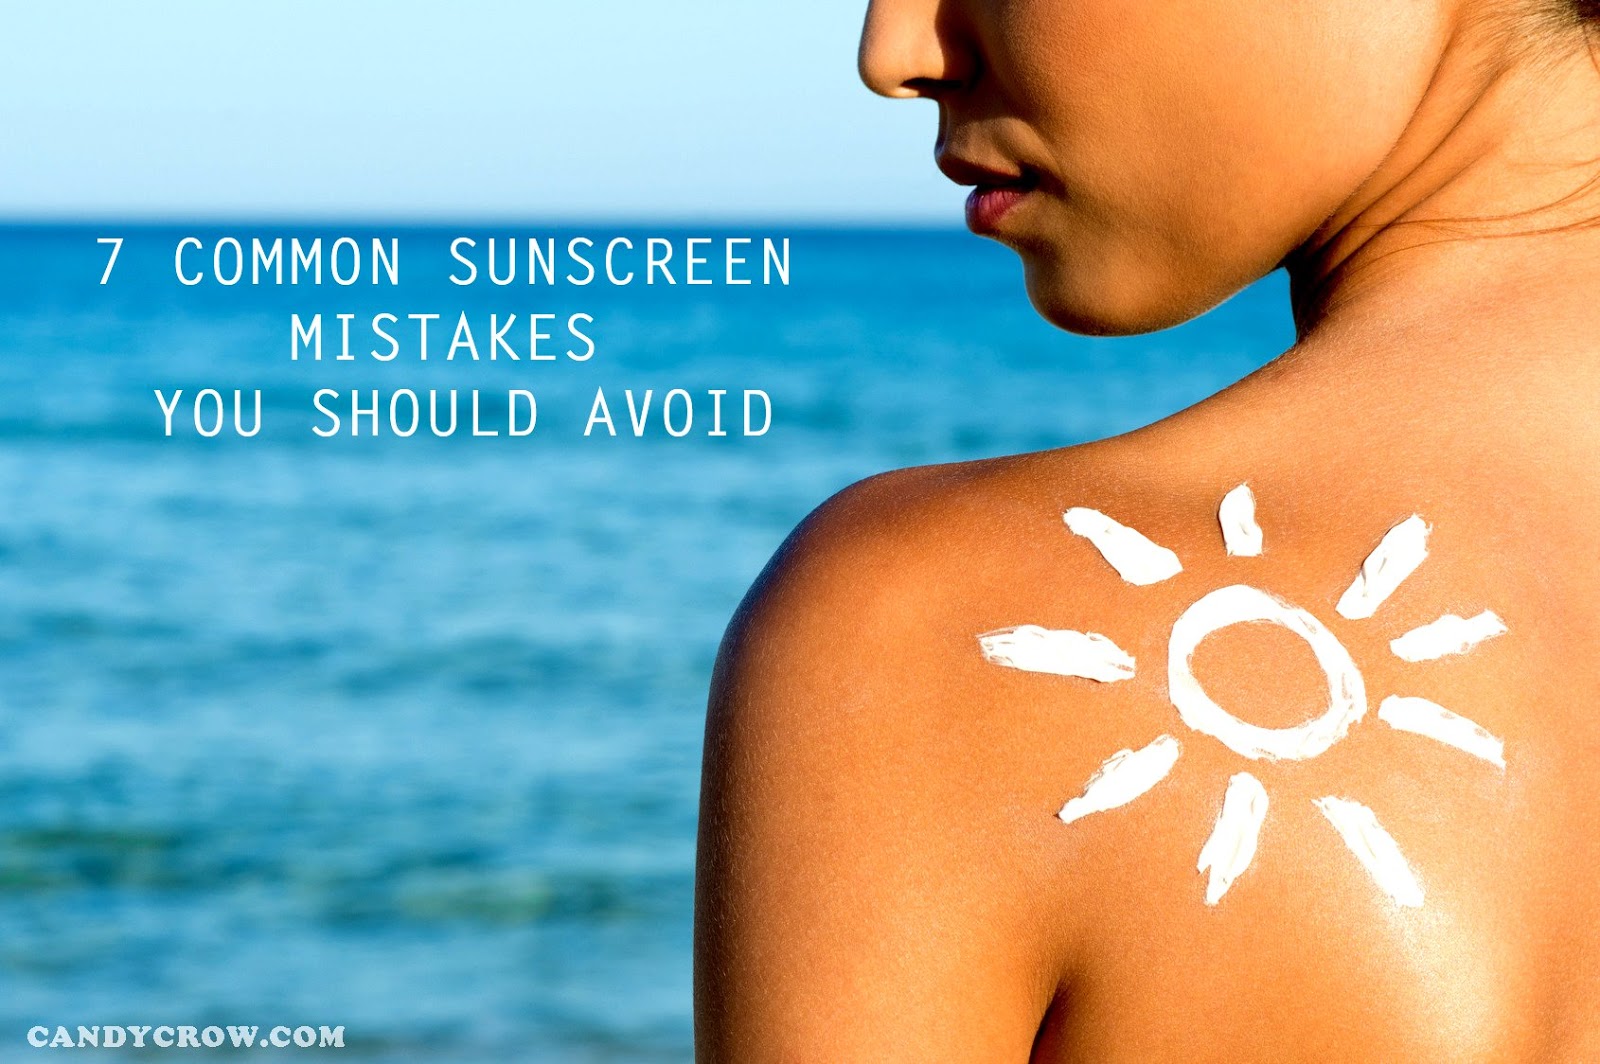 7 Common Sunscreen Mistakes you should AVOID!